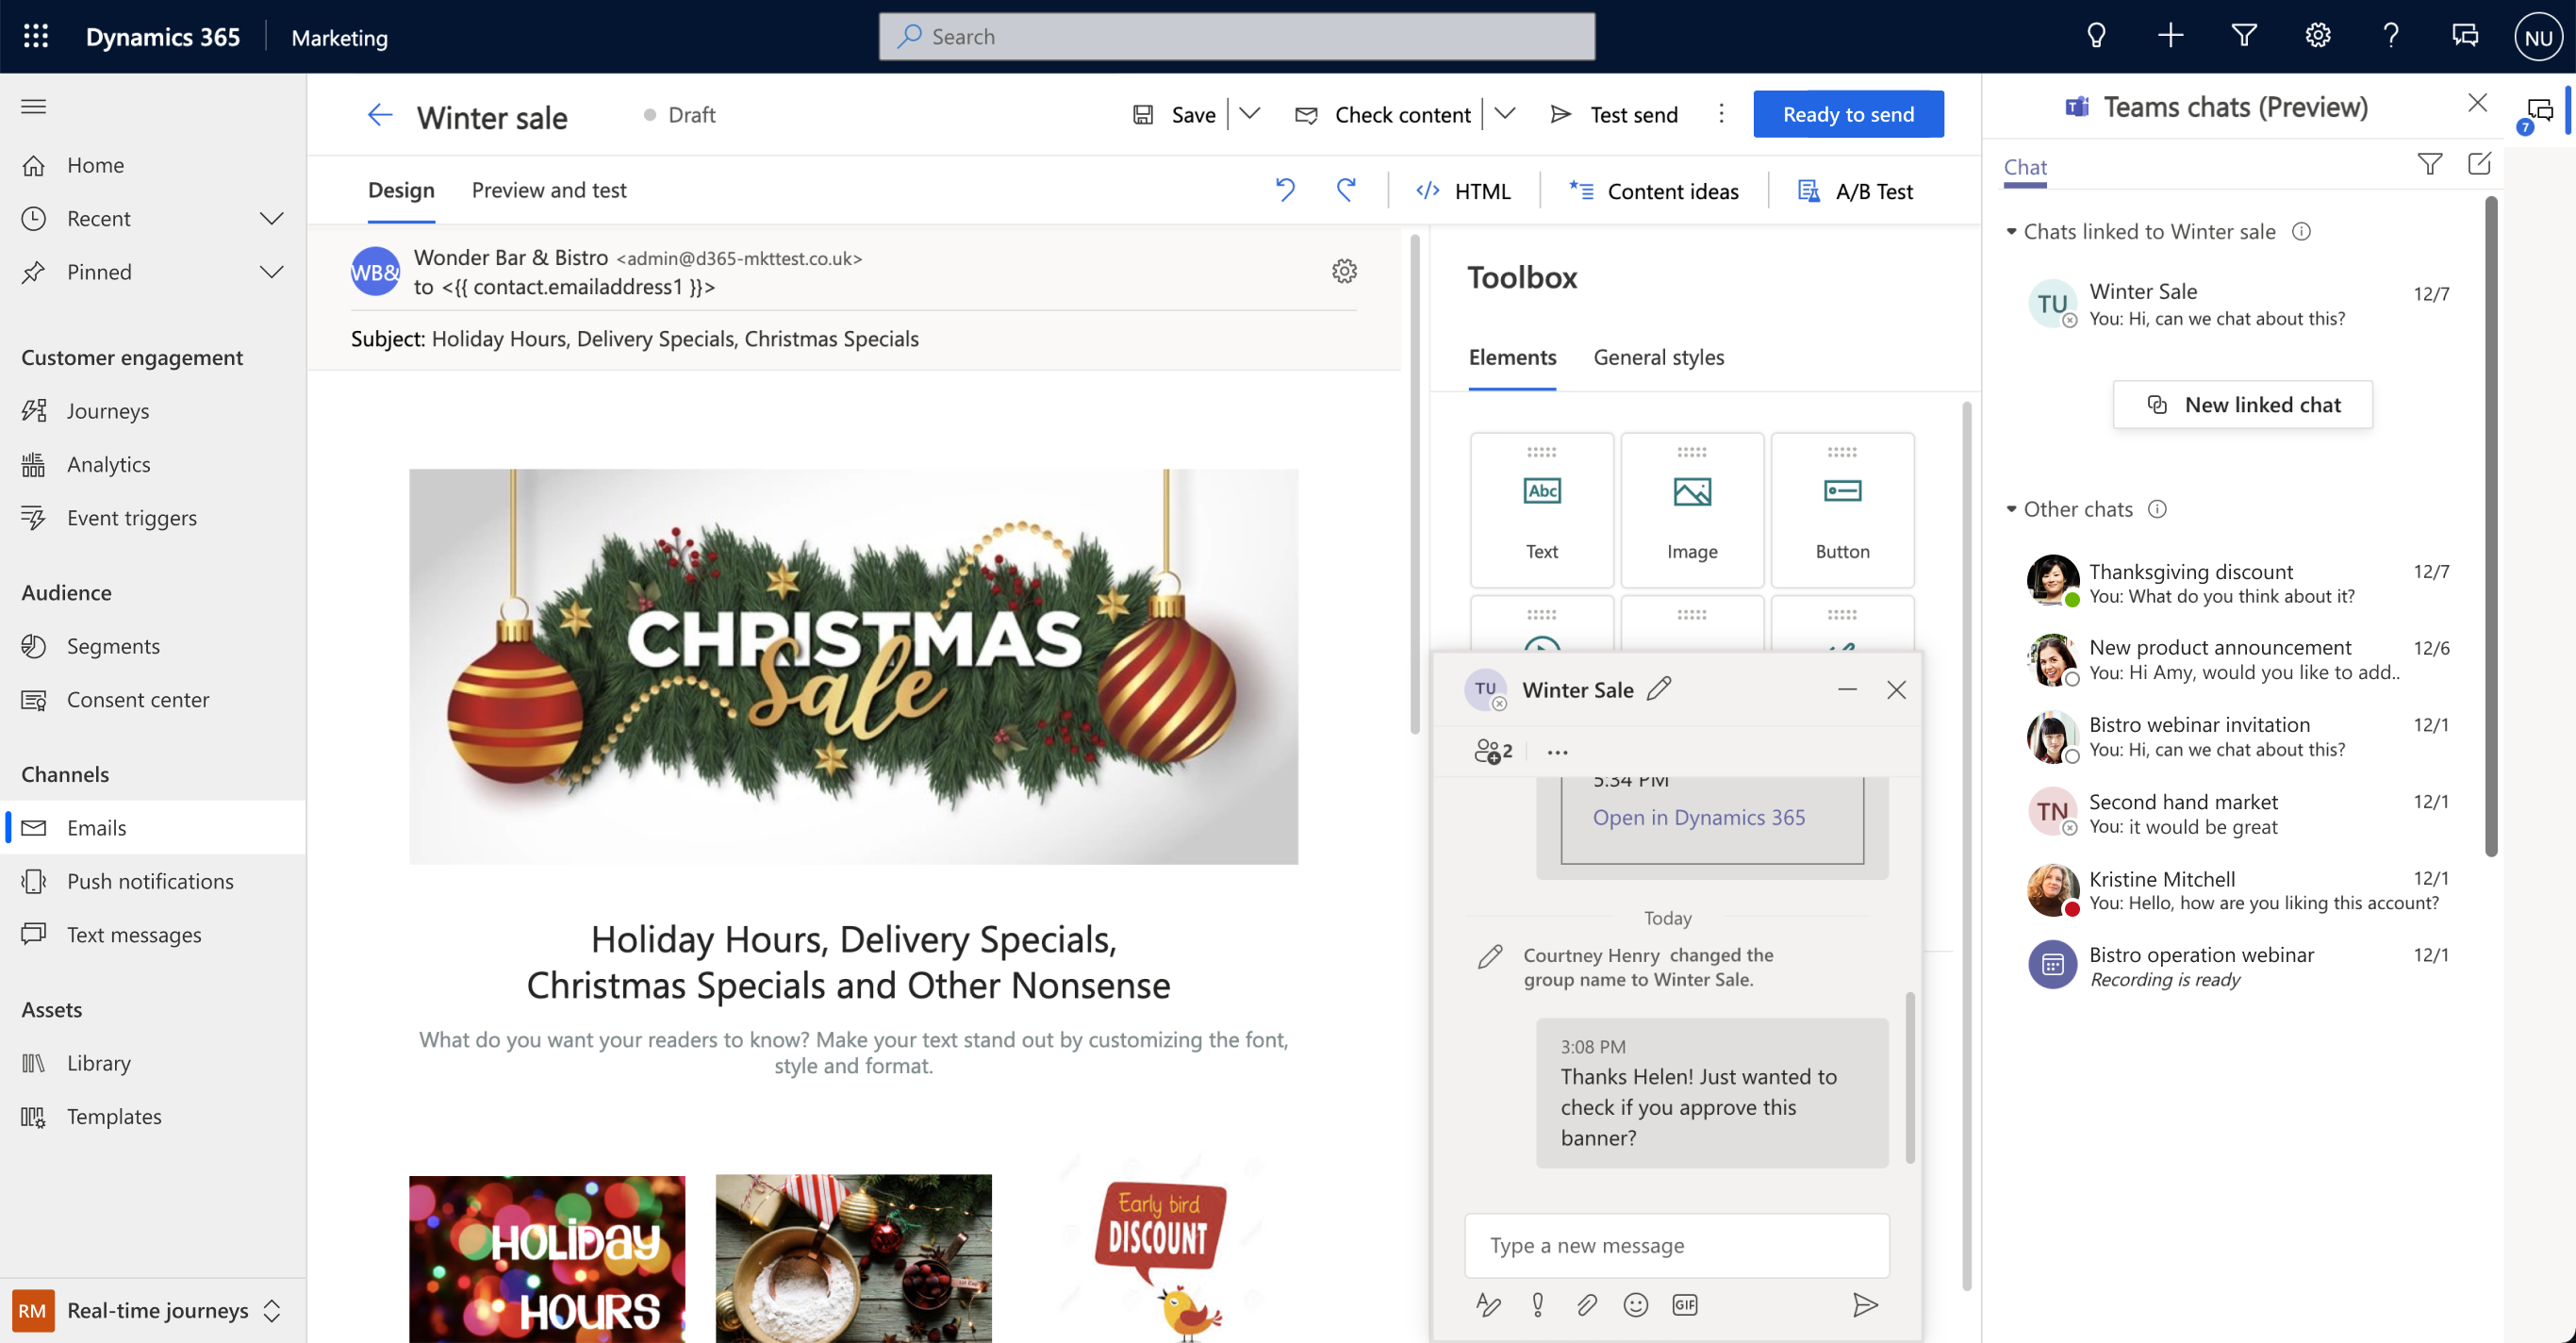 Make collaborative content and journey creation easy with Microsoft Teams chat inline.